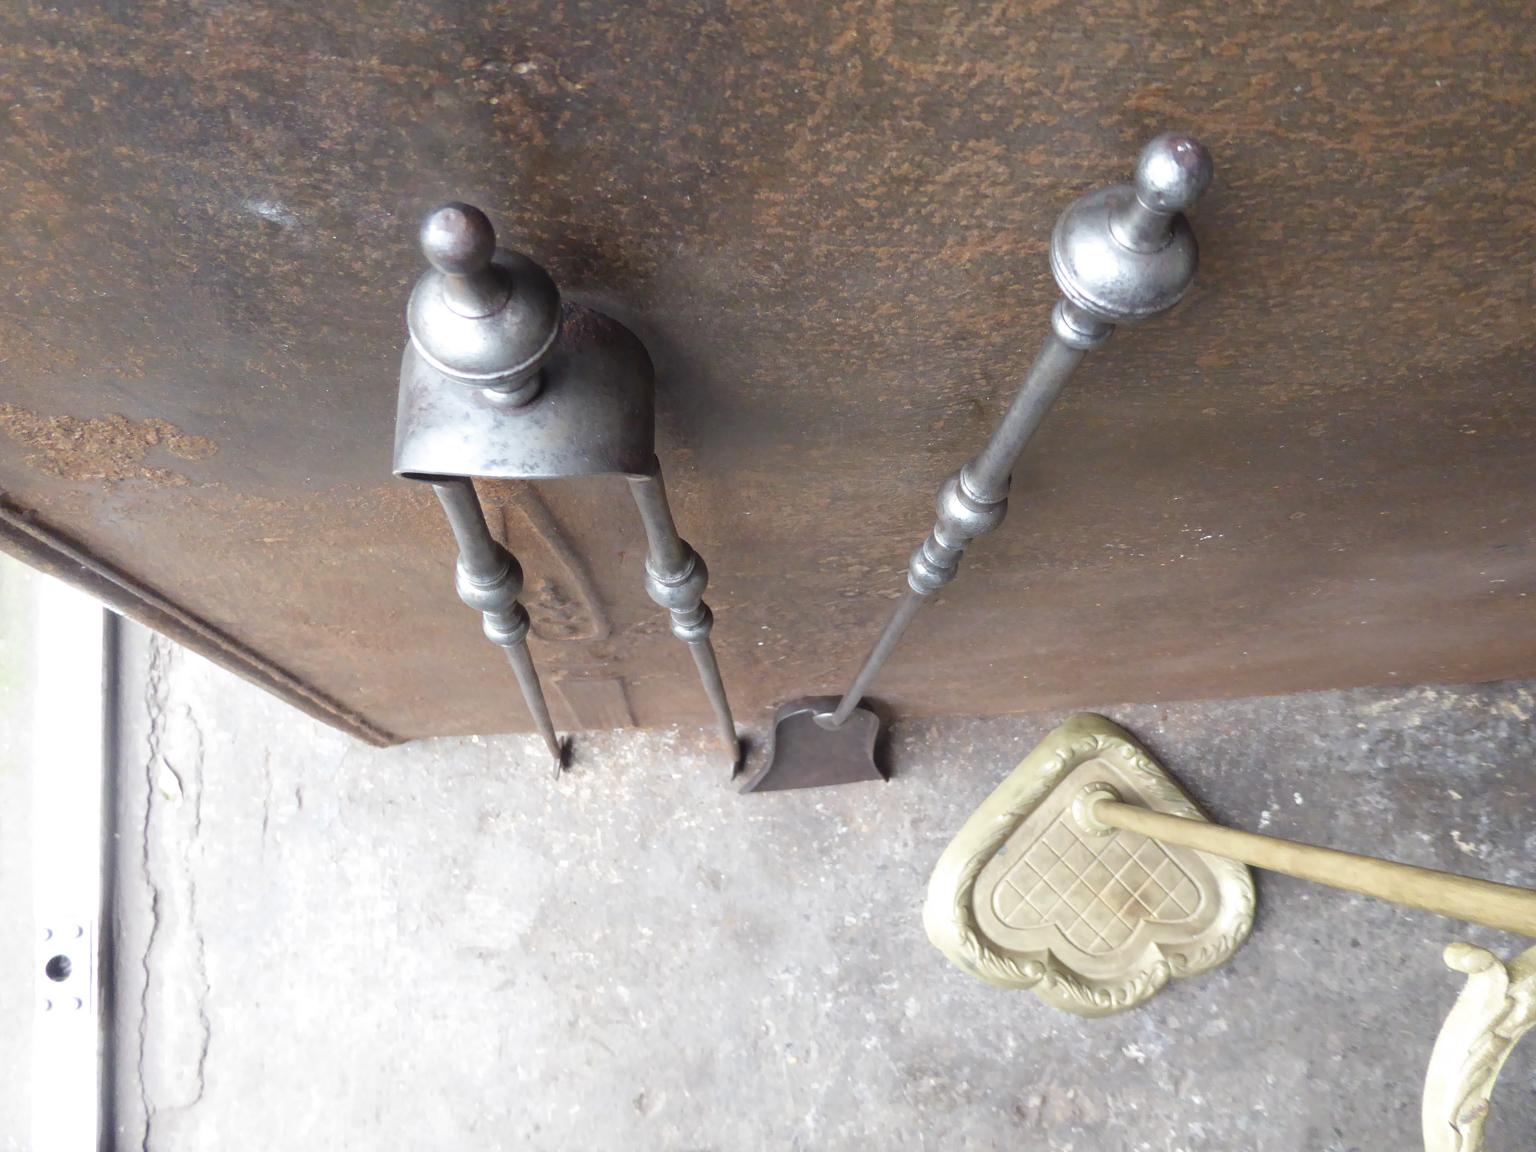 Antique French Fireplace Tools or Fire Tools, 19th - Early 20th Century 6